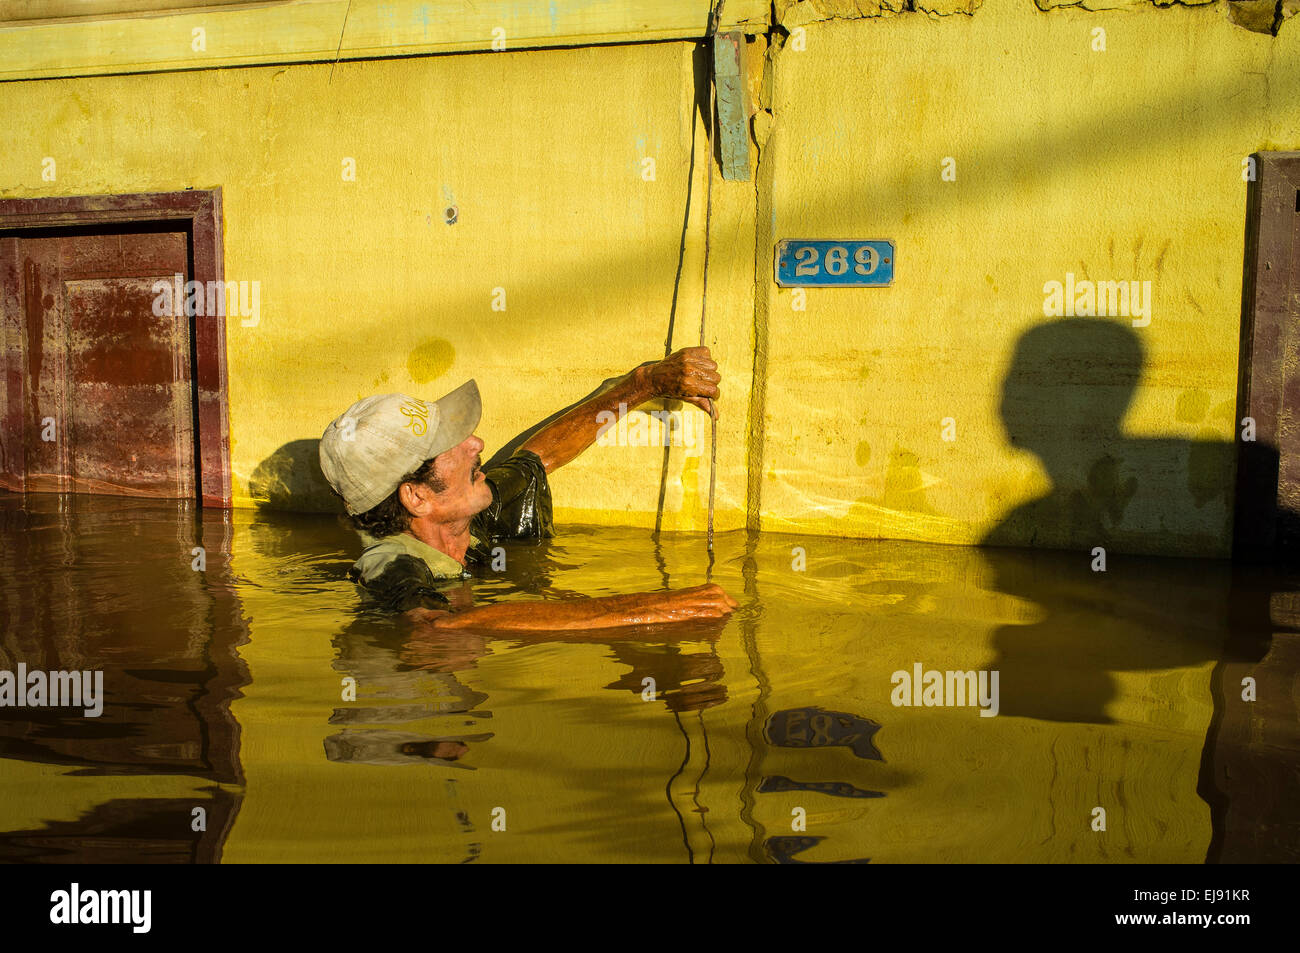 2015 flooding in Brazilian Amazon, flooded house. Joao Pereira de Araujo tries to check flood line inside his house at Triangulo Novo district, Rio Branco city, Acre State. Floods have been affecting thousands of people in the state of Acre, northern Brazil, since 23 February 2015, when some of the state’s rivers, in particular the Acre river, overflowed. Further heavy rainfall has forced river levels higher still, and on 03 March 2015 Brazil’s federal government declared a state of emergency in Acre State, where current flood situation has been described as the worst in 132 years. Stock Photo